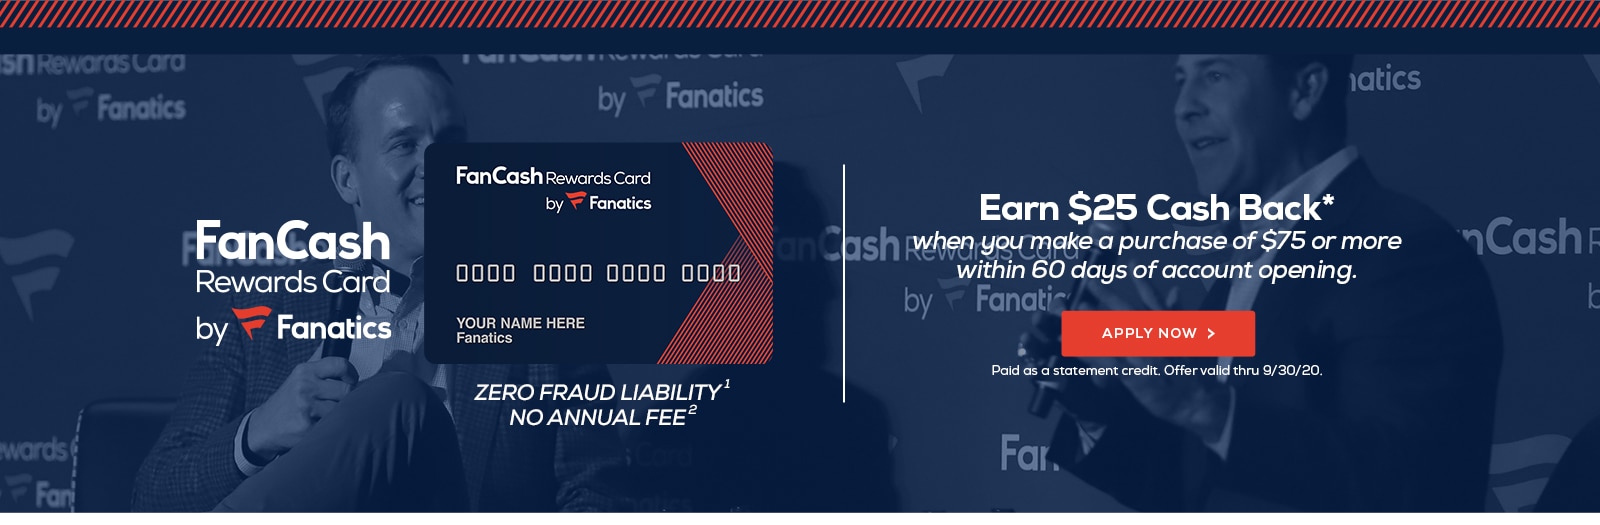 FanCash Rewards Card by Fanatics. Earn $25 Cash Back* when you make a purchase of $75 or more within 60 days of account opening. Apply now. Paid as a statement credit. Offer valid thru 9/30/20.